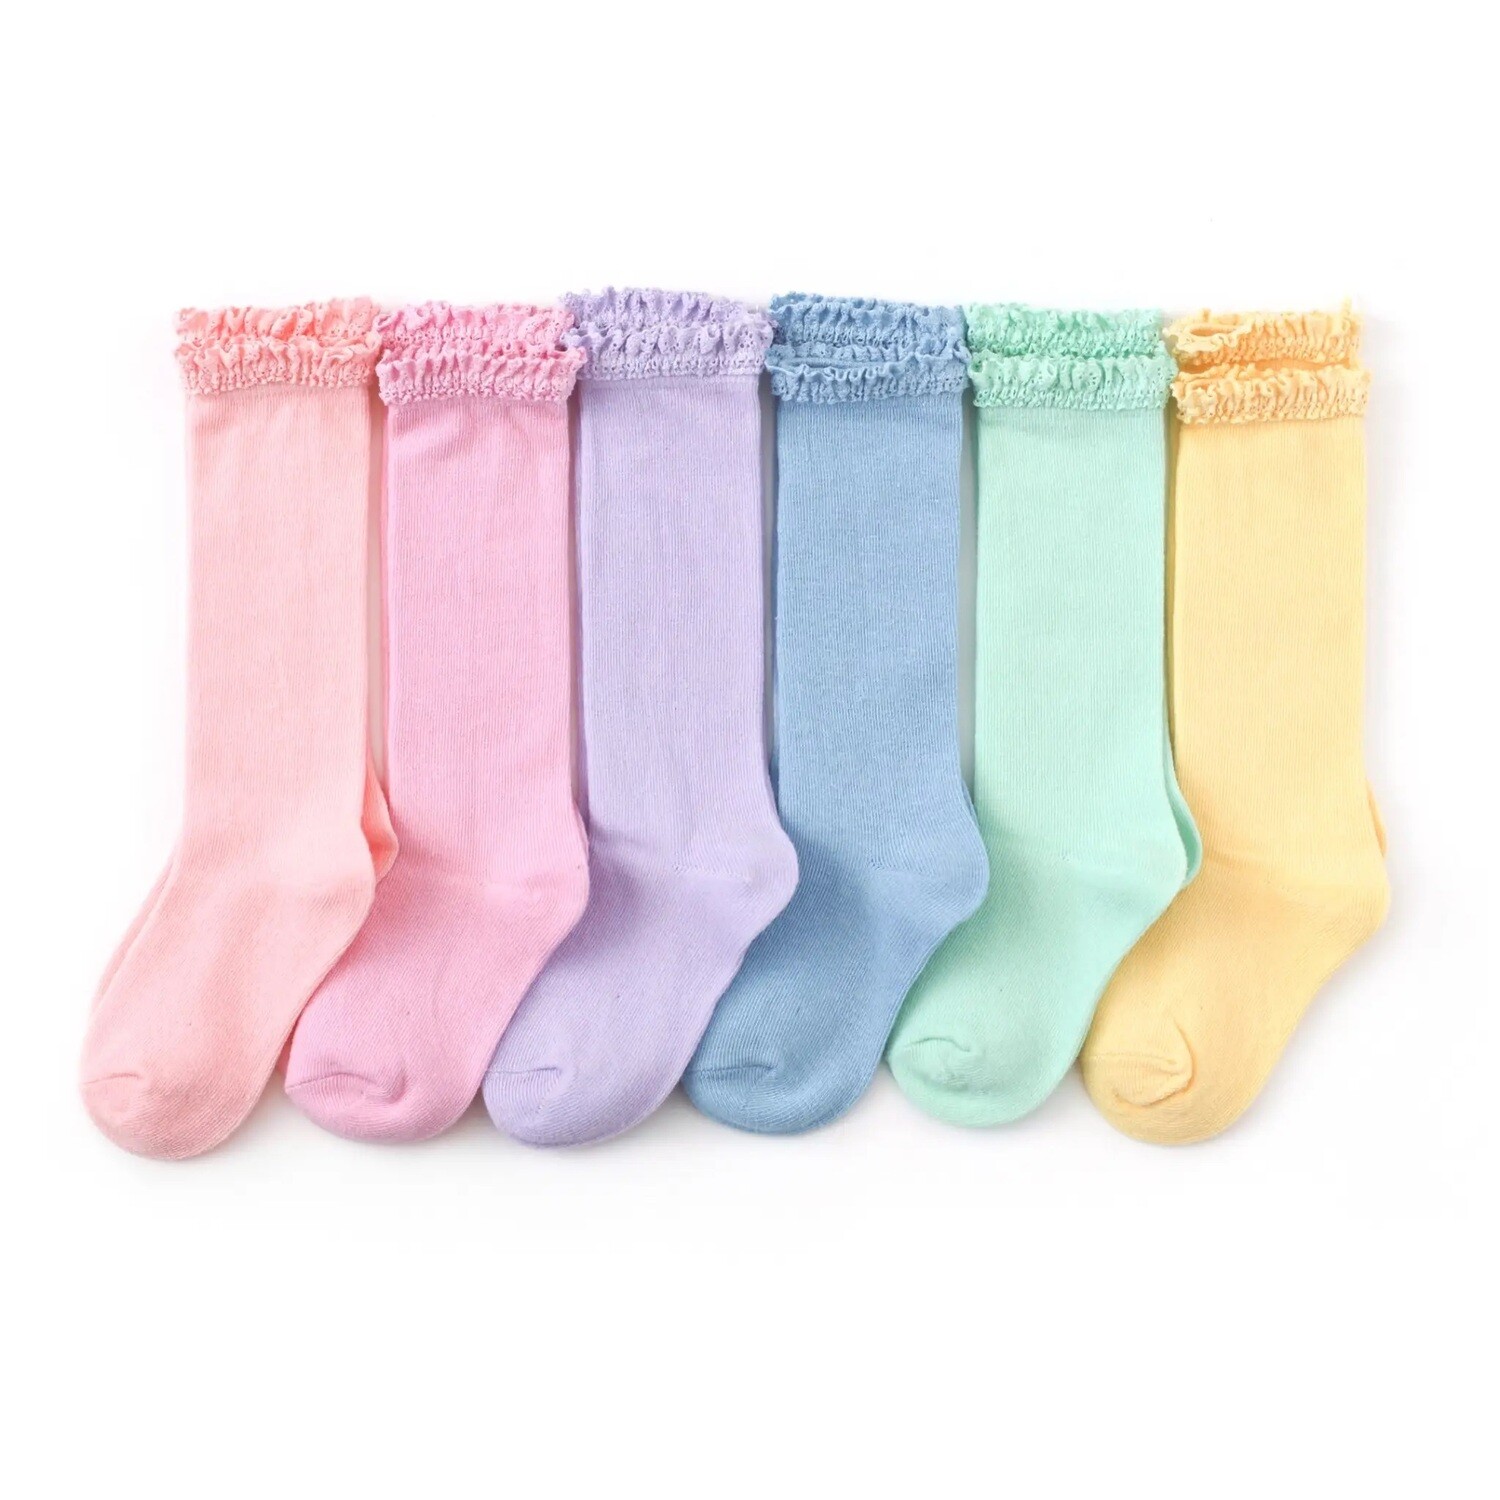 Little Stocking Co. Pastel Lace Top Socks